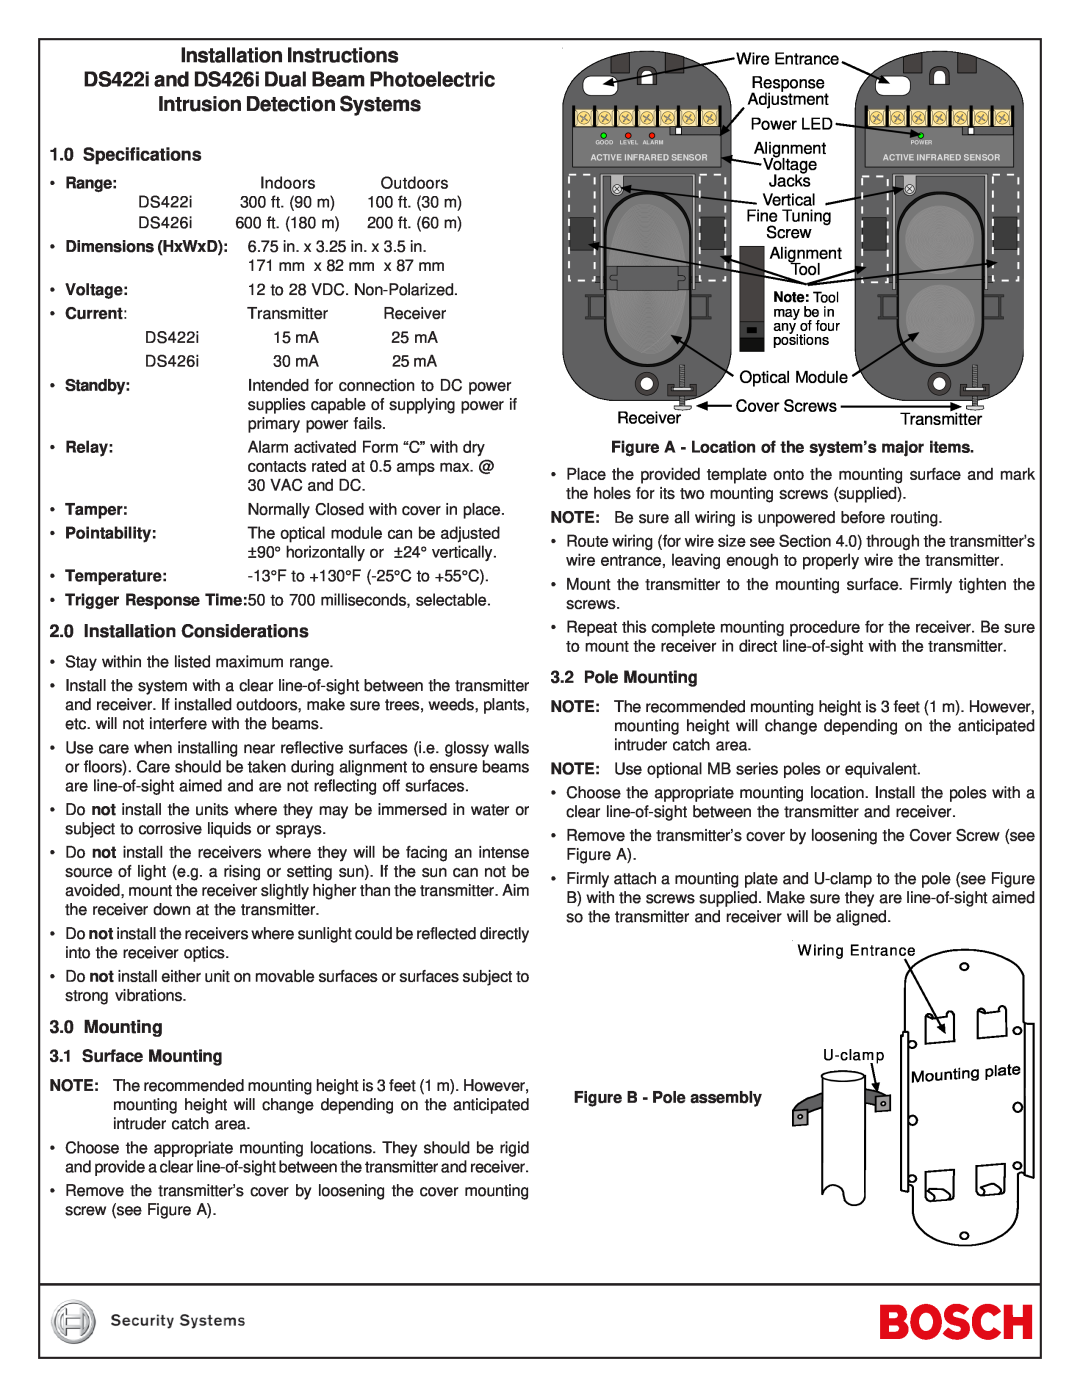 Bosch Appliances DS422I installation instructions Specifications, Installation Considerations, Pole Mounting, Range, Relay 